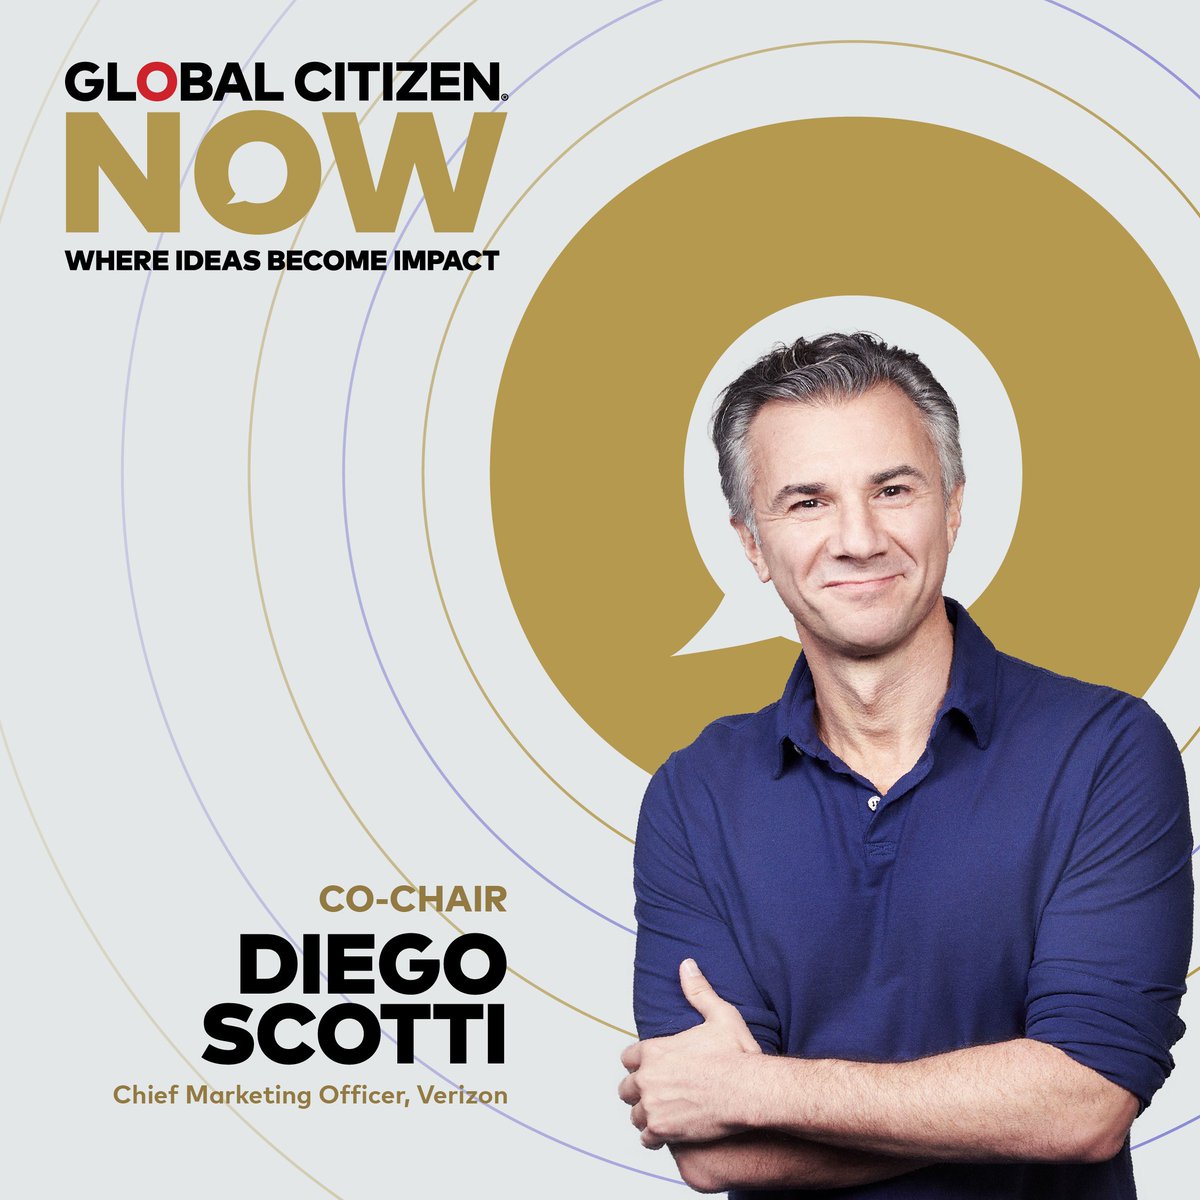 Last year, @diegoscotti, Chief Marketing Officer at @Verizon, spoke at #GlobalCitizenNOW about education and technology, and he’s joining us again this year!